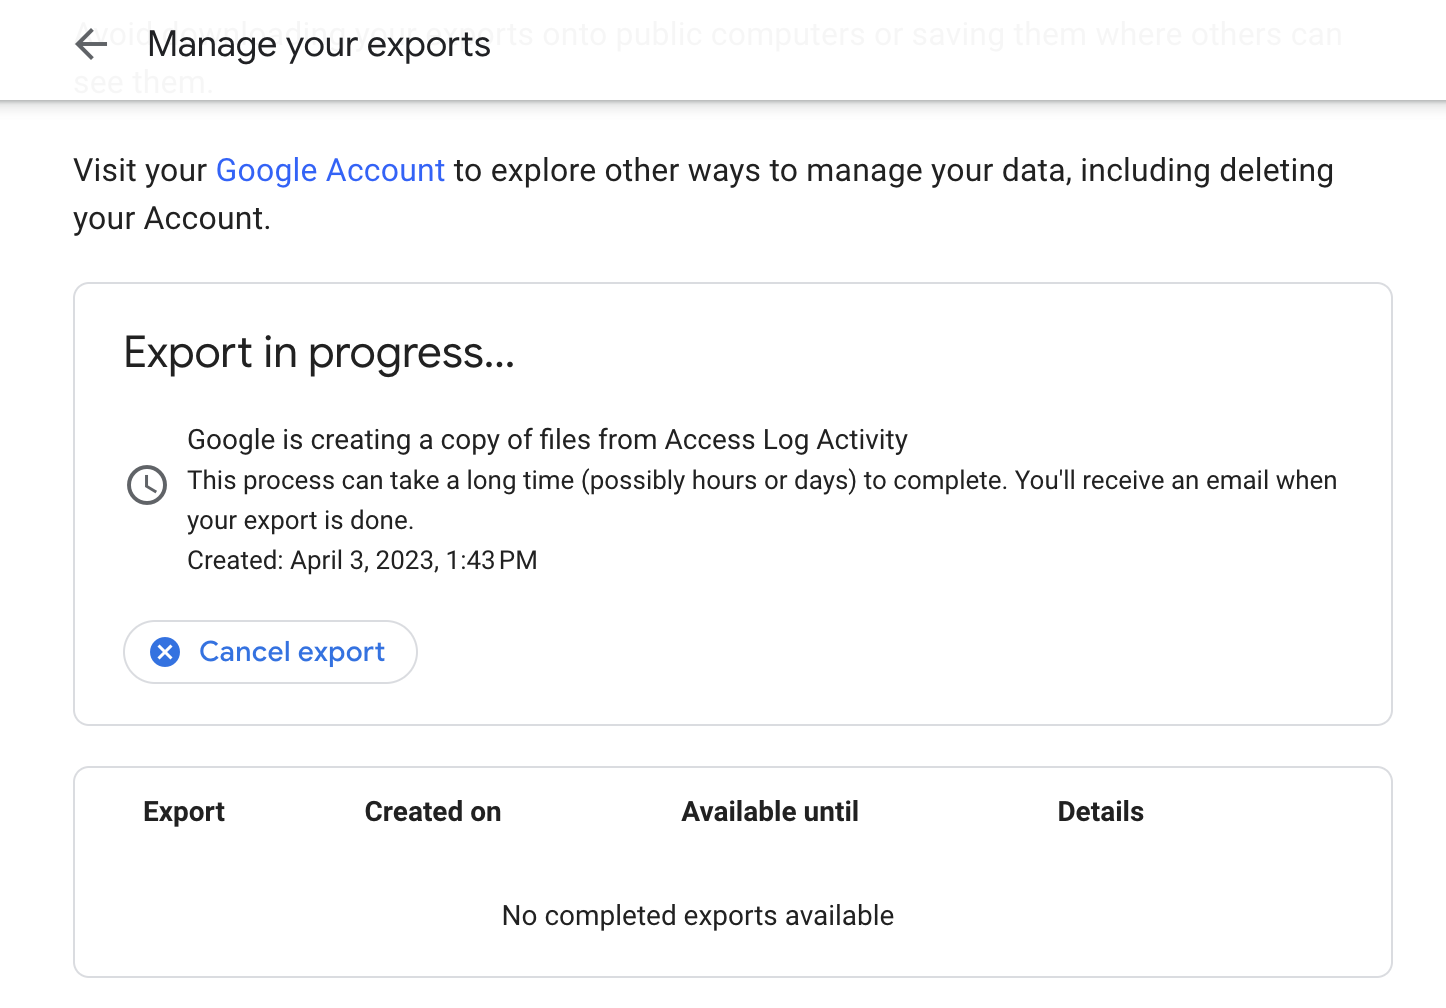 View ongoing and available exports from Google Takeout